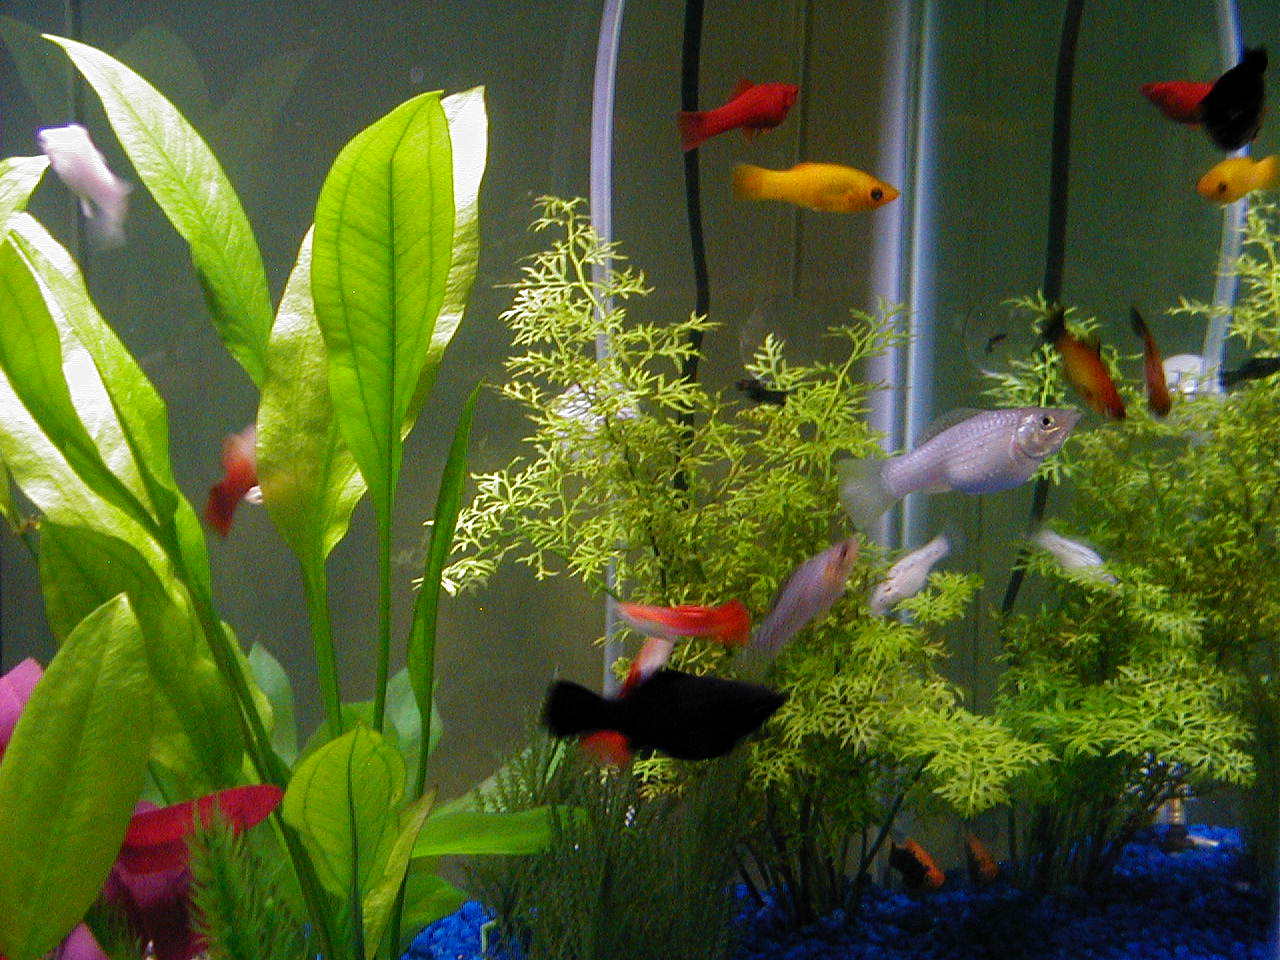 Here's a nice shot showing 24k Gold molly, black molly, silver molly, firefly platy, red velvet platy, tuxedo platy, tequila sunrise platy, and guppy 